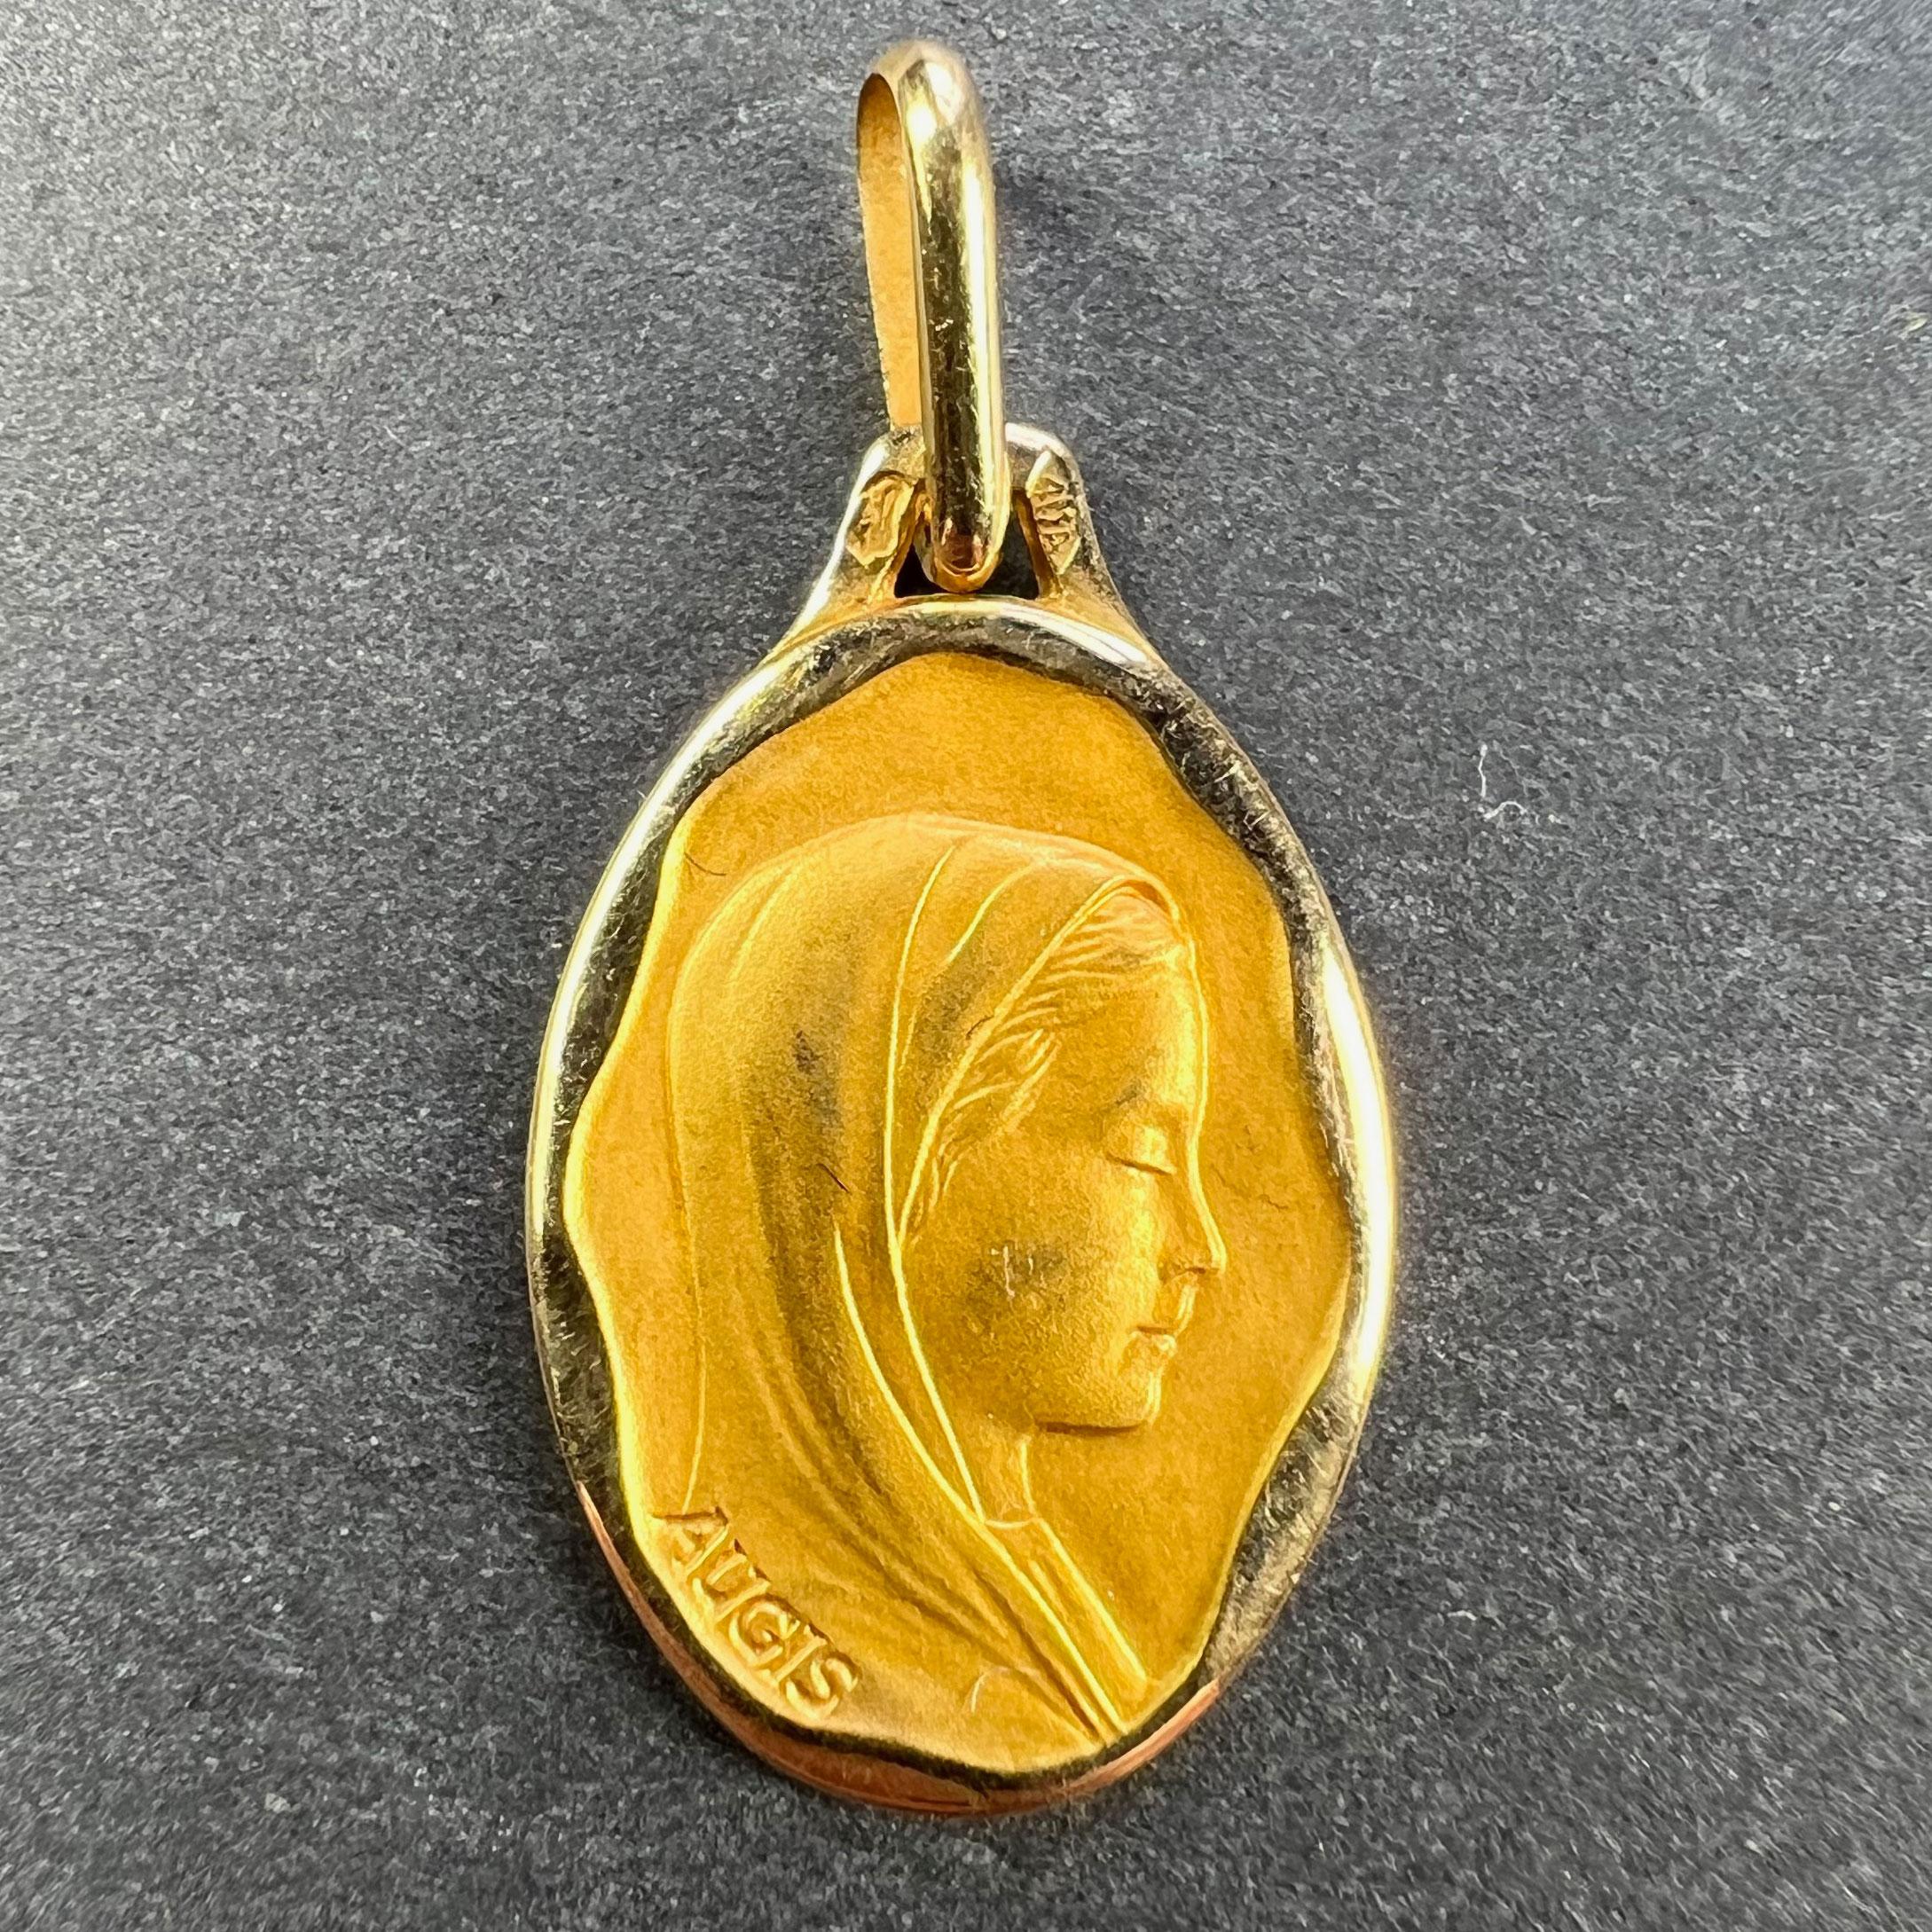 A French 18 karat (18K) yellow gold pendant designed as an oval medal depicting the Virgin Mary within a wavy polished frame. Signed Augis. Stamped with the eagle’s head for French manufacture and 18 karat gold, with maker’s mark for